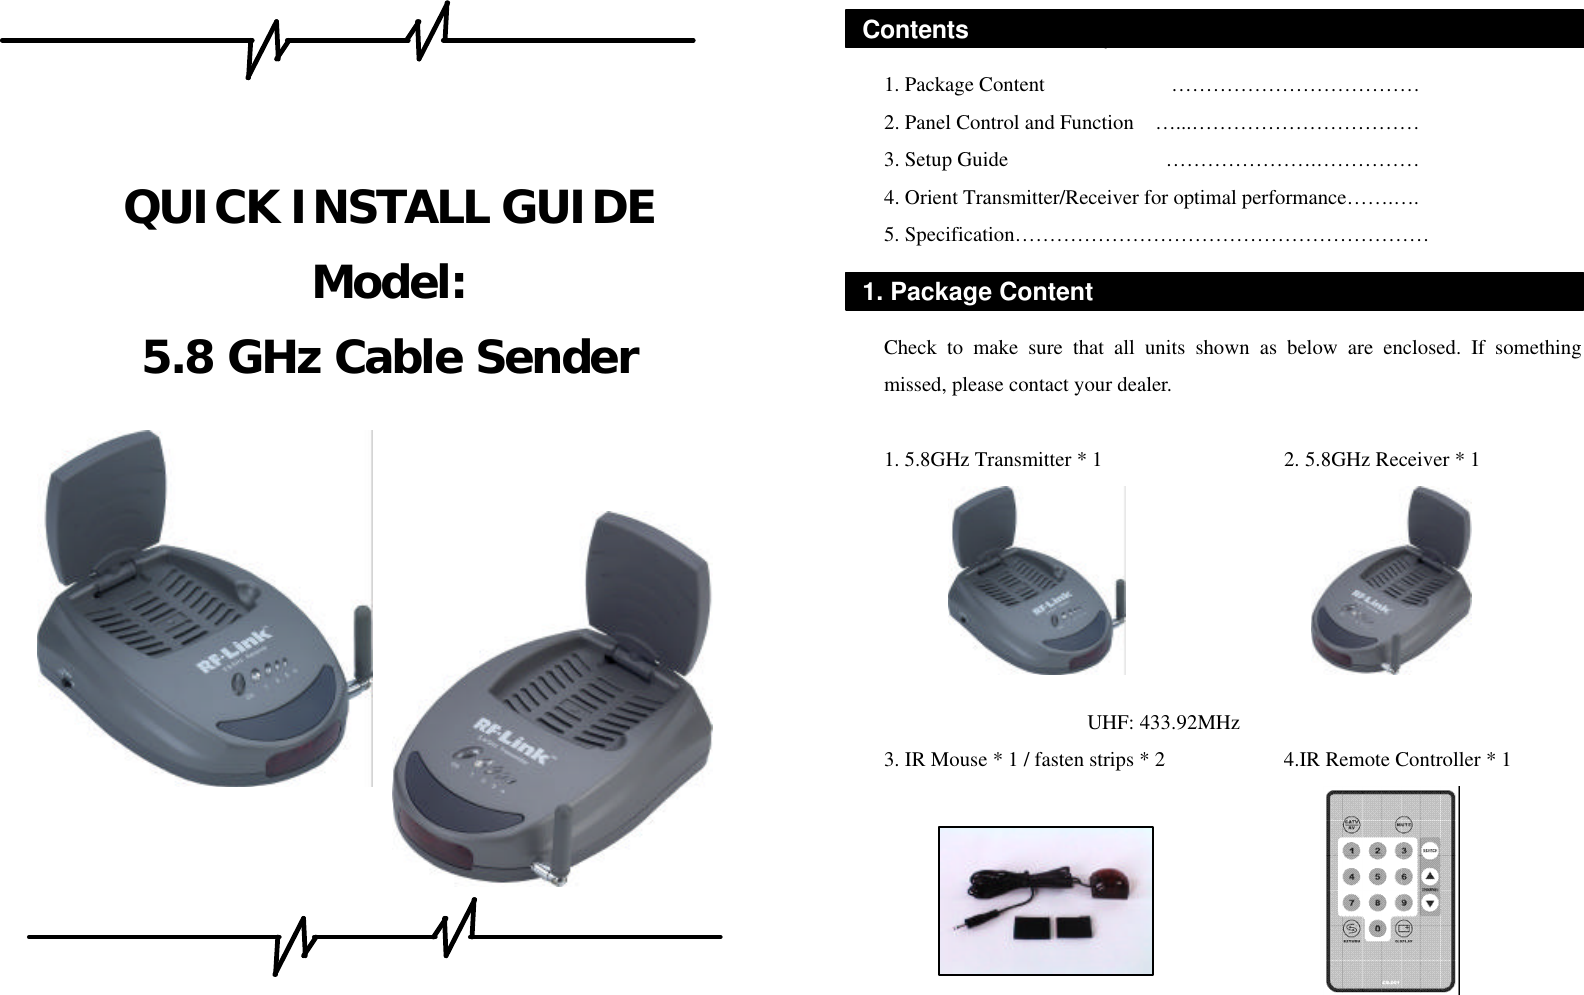     QUICK INSTALL GUIDE Model: 5.8 GHz Cable Sender                  • software, warranty card, and user manuals.   1. Package Content            ……………………………… 2. Panel Control and Function  …...…………………………… 3. Setup Guide               ………………….…………… 4. Orient Transmitter/Receiver for optimal performance…….…. 5. Specification……………………………………………………     Check to make sure that all units shown as below are enclosed. If something missed, please contact your dealer.  1. 5.8GHz Transmitter * 1                2. 5.8GHz Receiver * 1       UHF: 433.92MHz (USA Standard) 3. IR Mouse * 1 / fasten strips * 2       4.IR Remote Controller * 1                   Contents 1. Package Content 